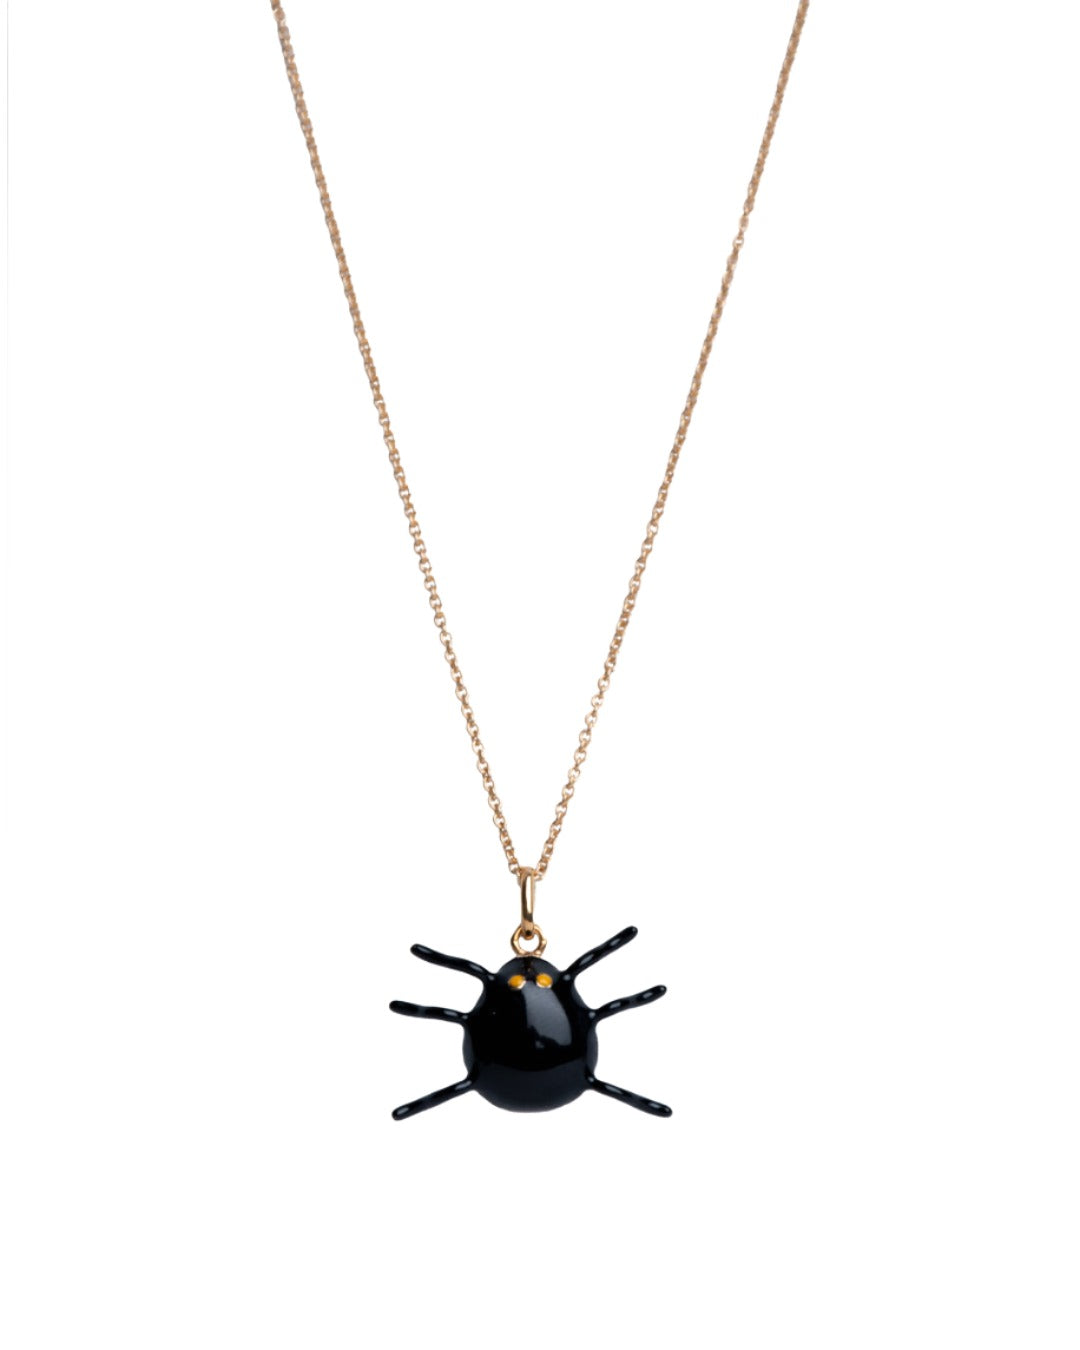 Necklace spider colorfull fun jewelry